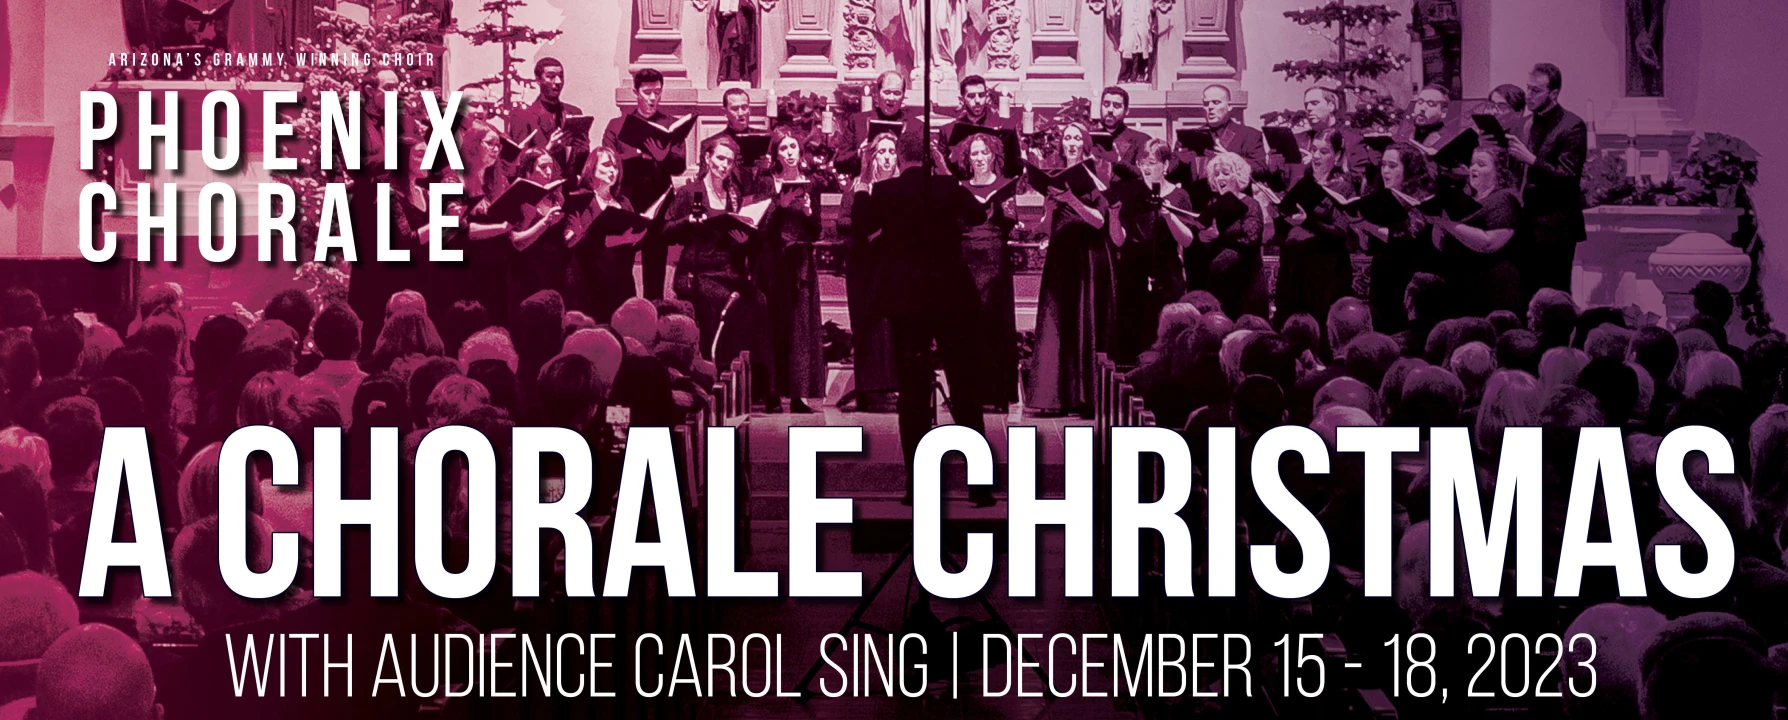 Phoenix Chorale: A Chorale Christmas Camelback Bible Church Matinee: What to expect - 1